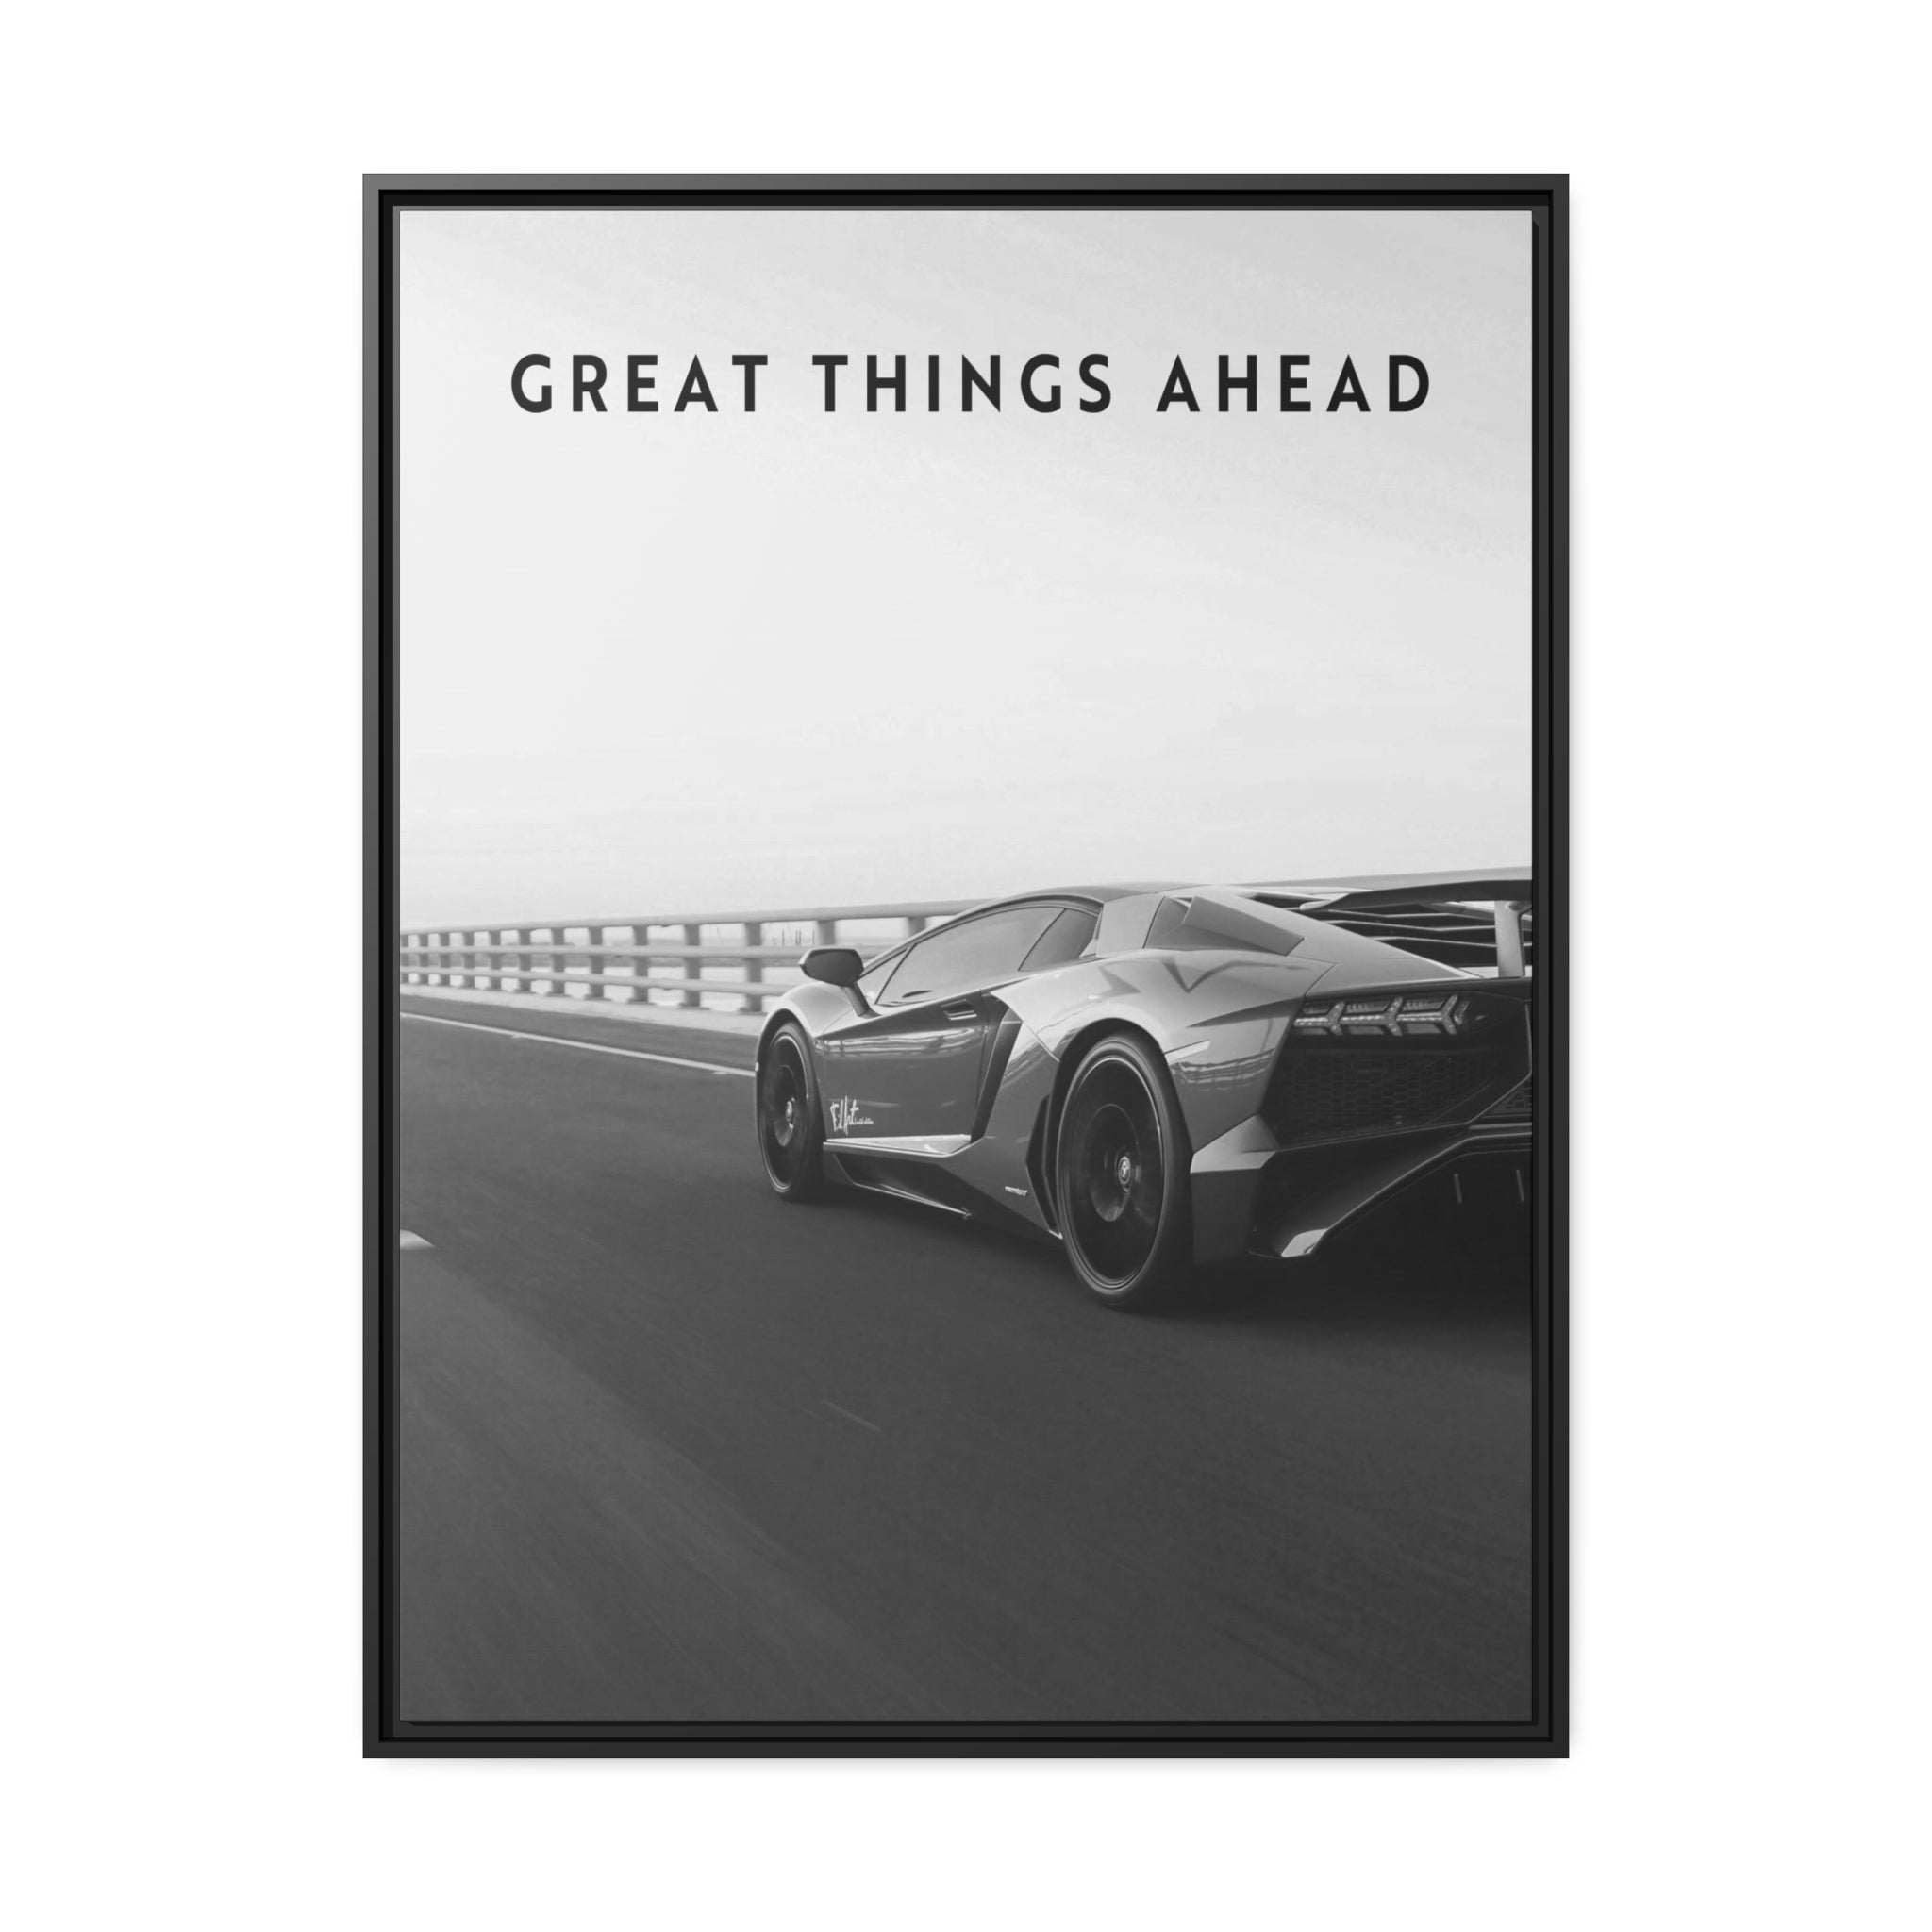 Great Things Ahead - Sports Car Black And White - Wall Art additional image 5